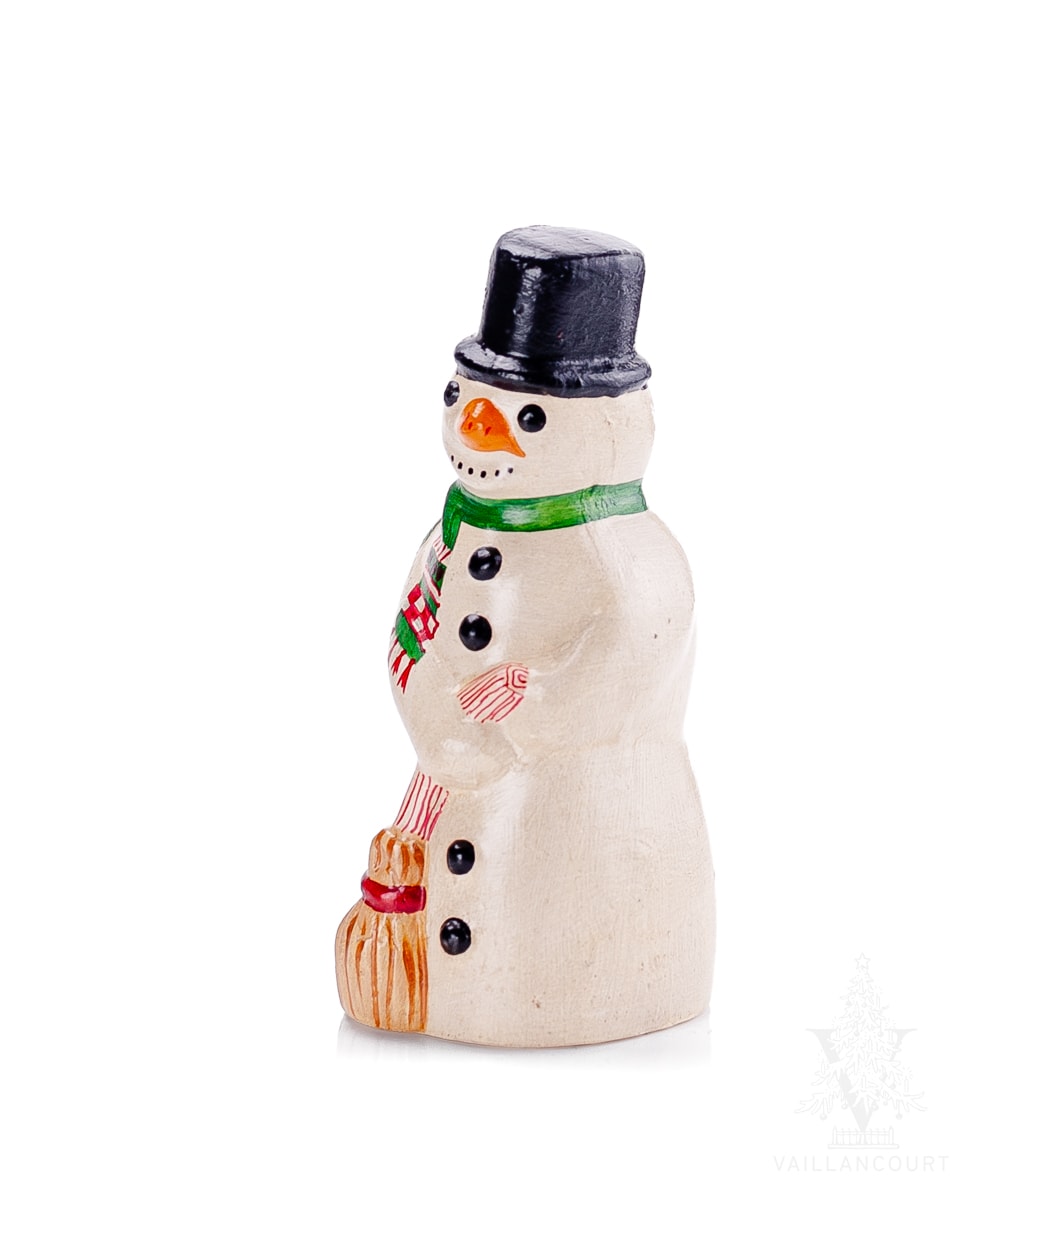 Snowman with Scarf from Vaillancourt